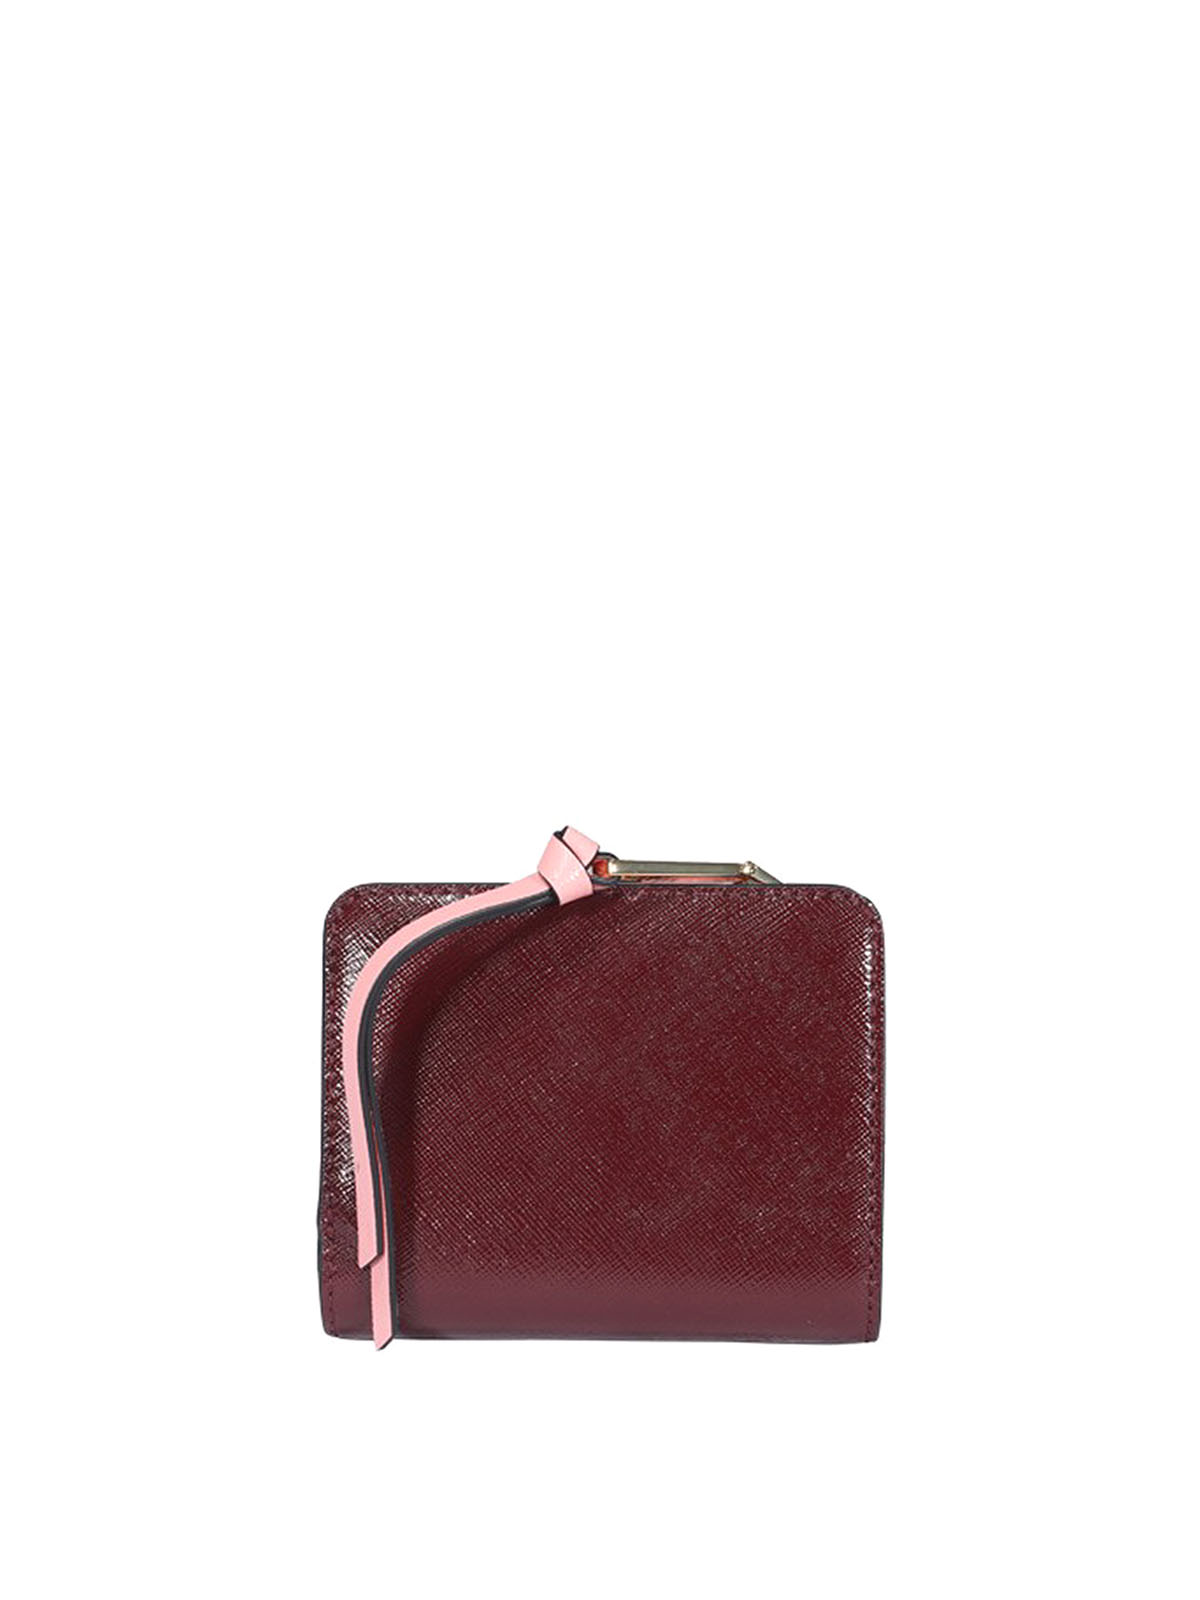 Marc Jacobs 'the Snapshot Mini Compact' Wallet